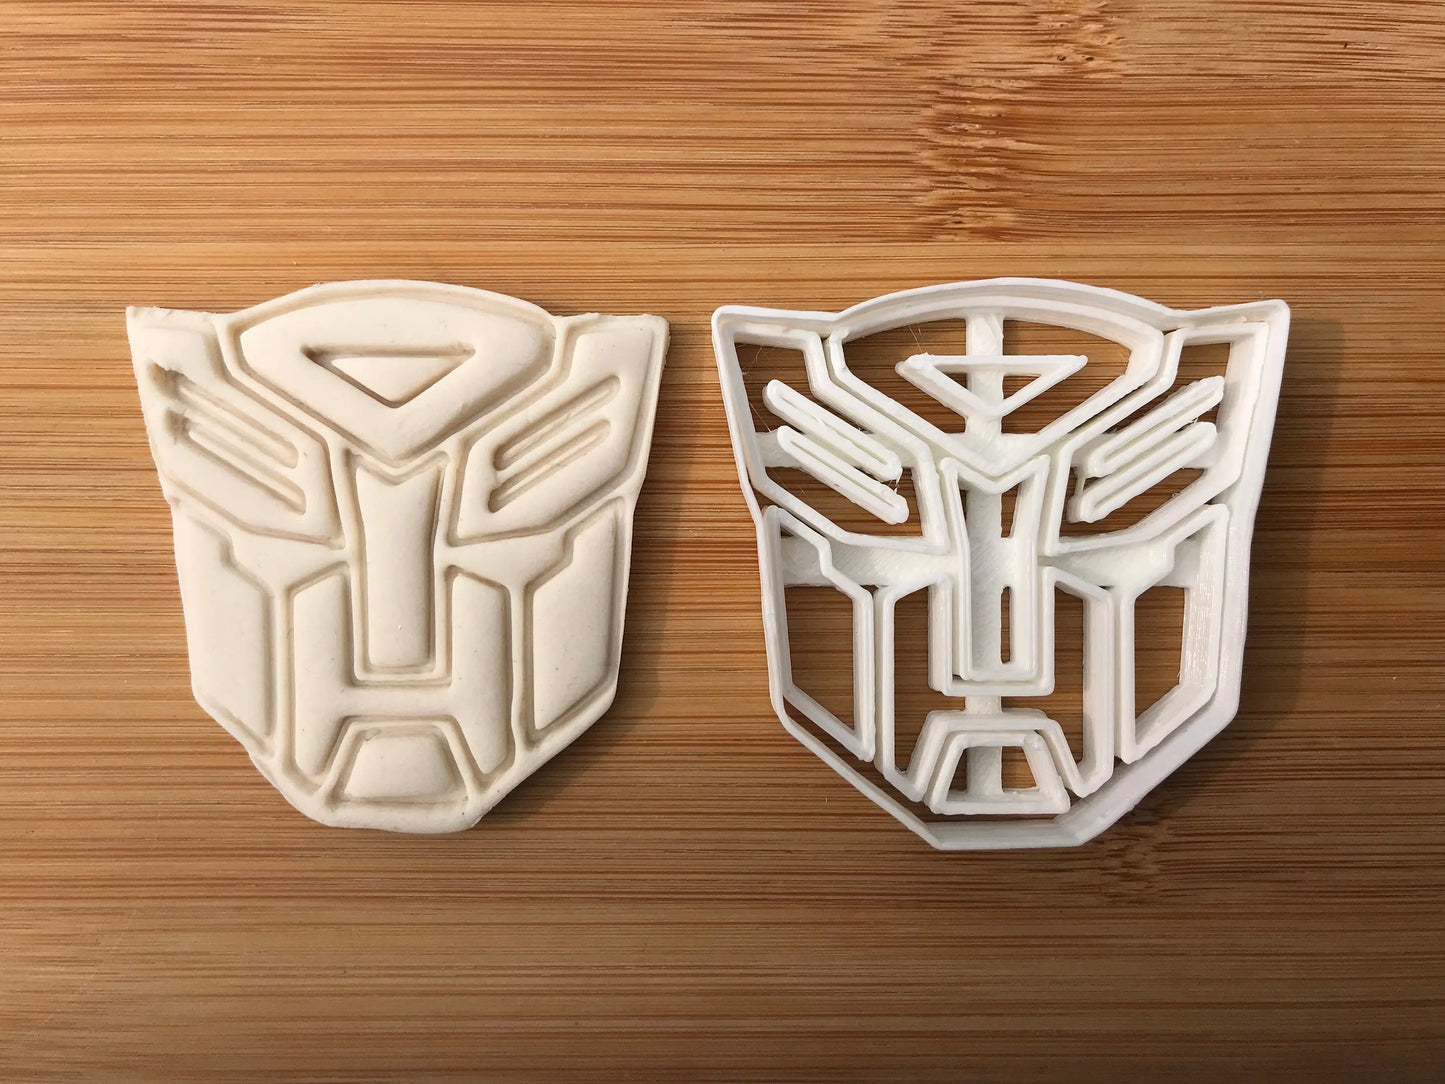 Transformer-inspired 1 Uk Seller Plastic Biscuit Cookie Cutter Fondant Cake Decor MEG cookie cutters